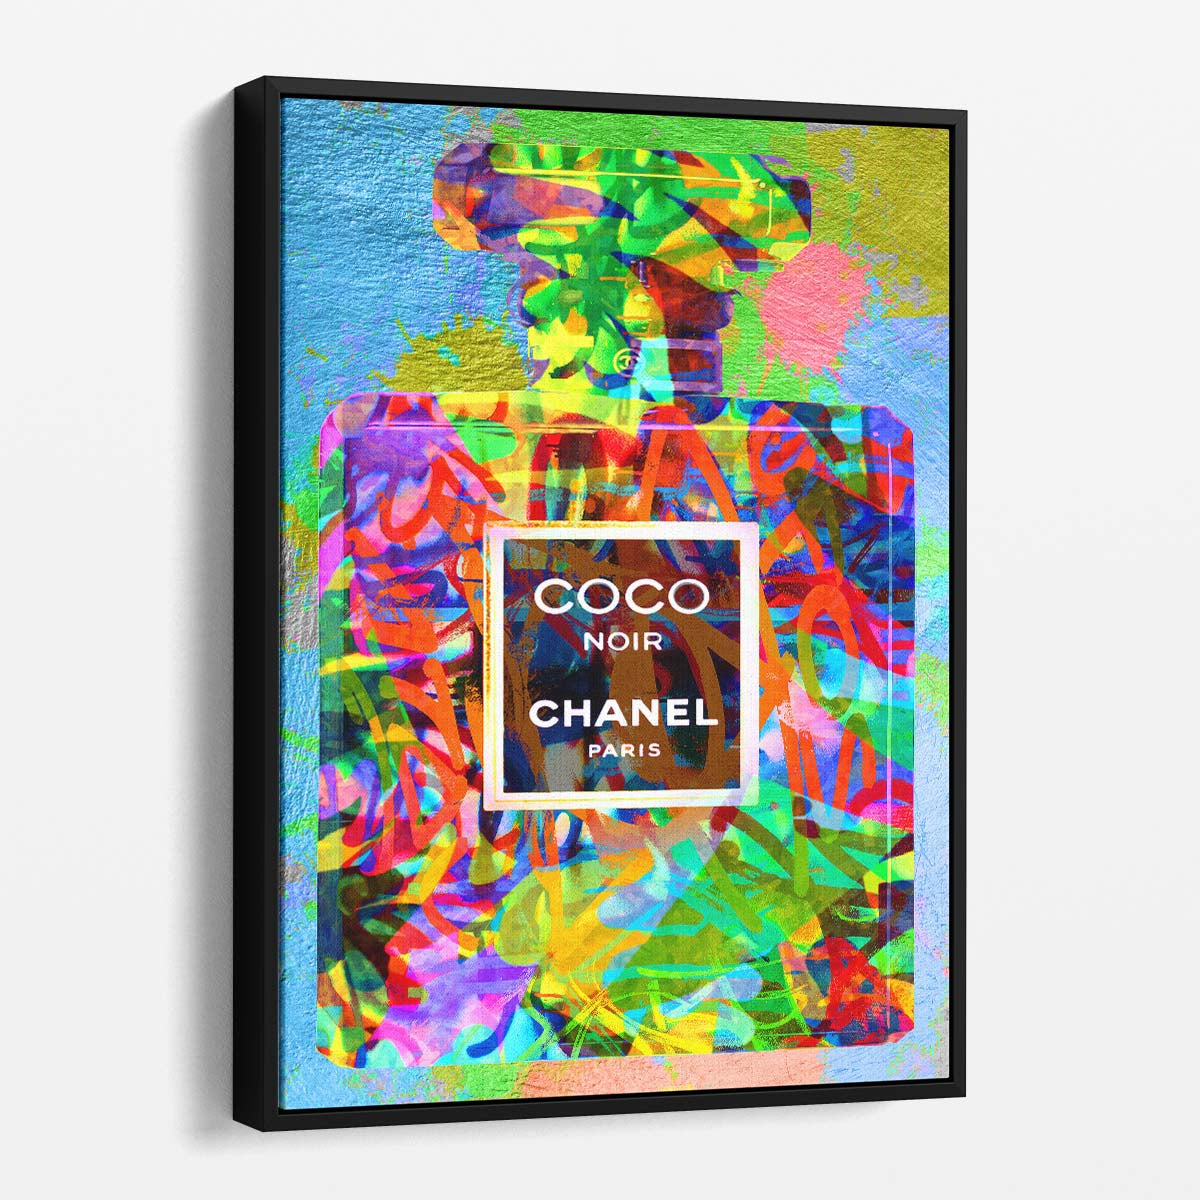 Coco Chanel Noir Perfume Graffiti Neon Wall Art by Luxuriance Designs. Made in USA.